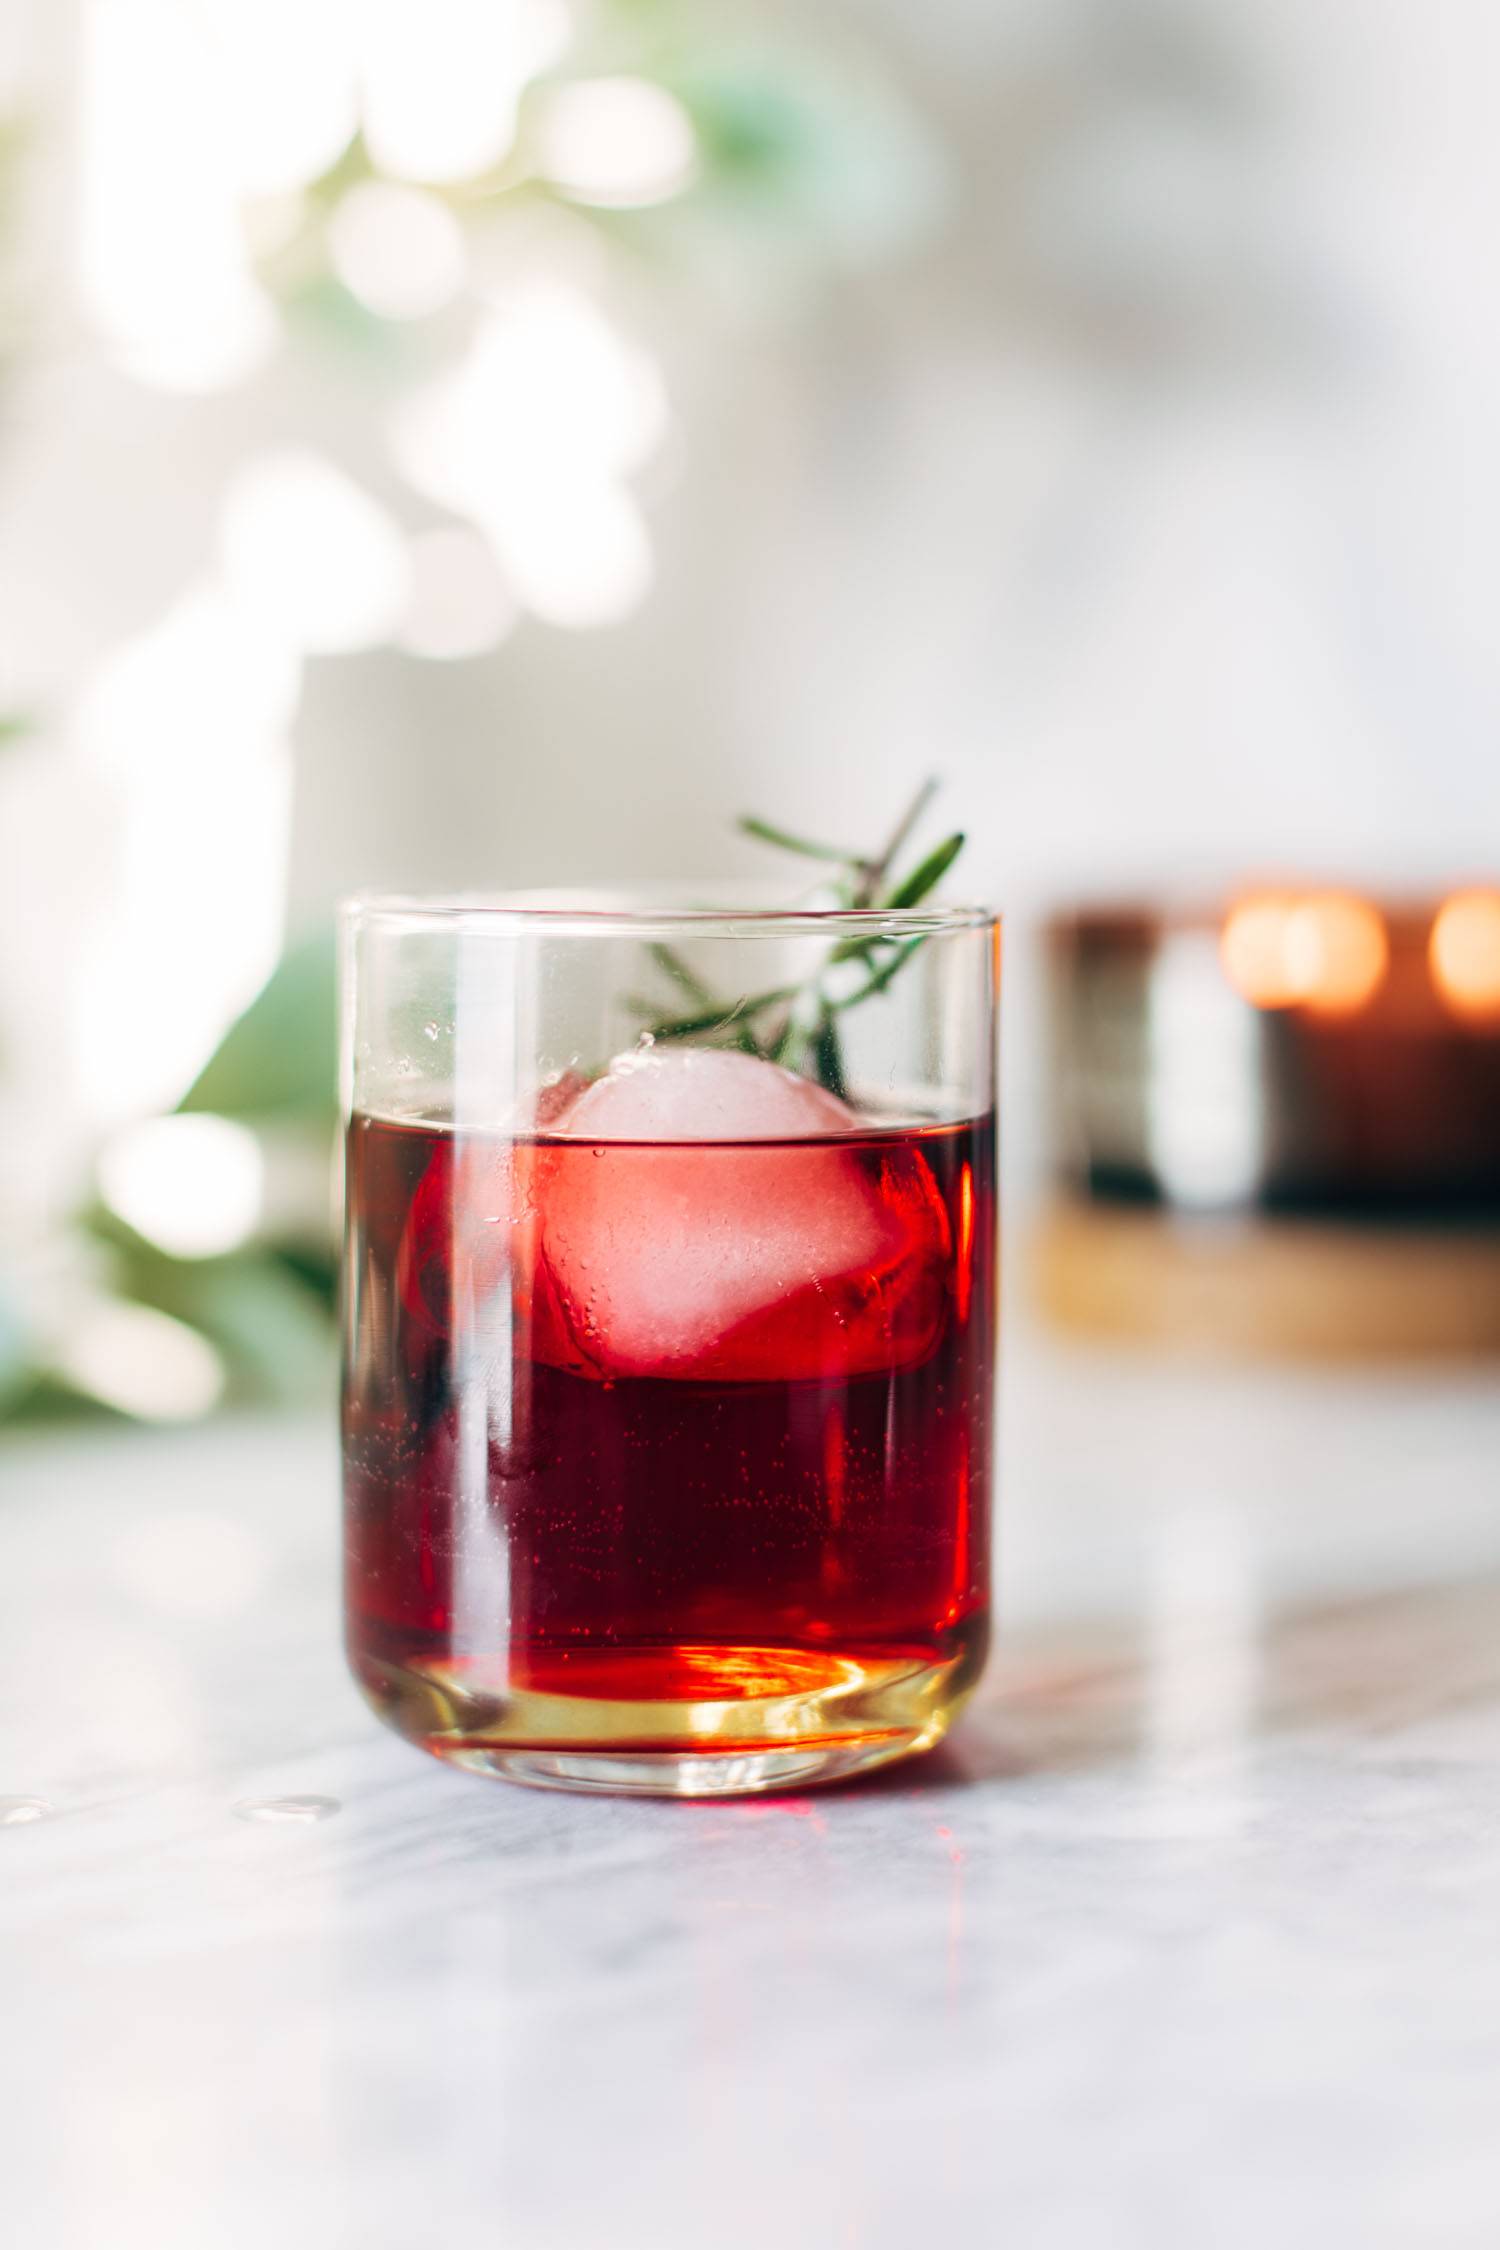 A clear cocktail glass with red liquid, a large ice cube, and a sprig of rosemary.